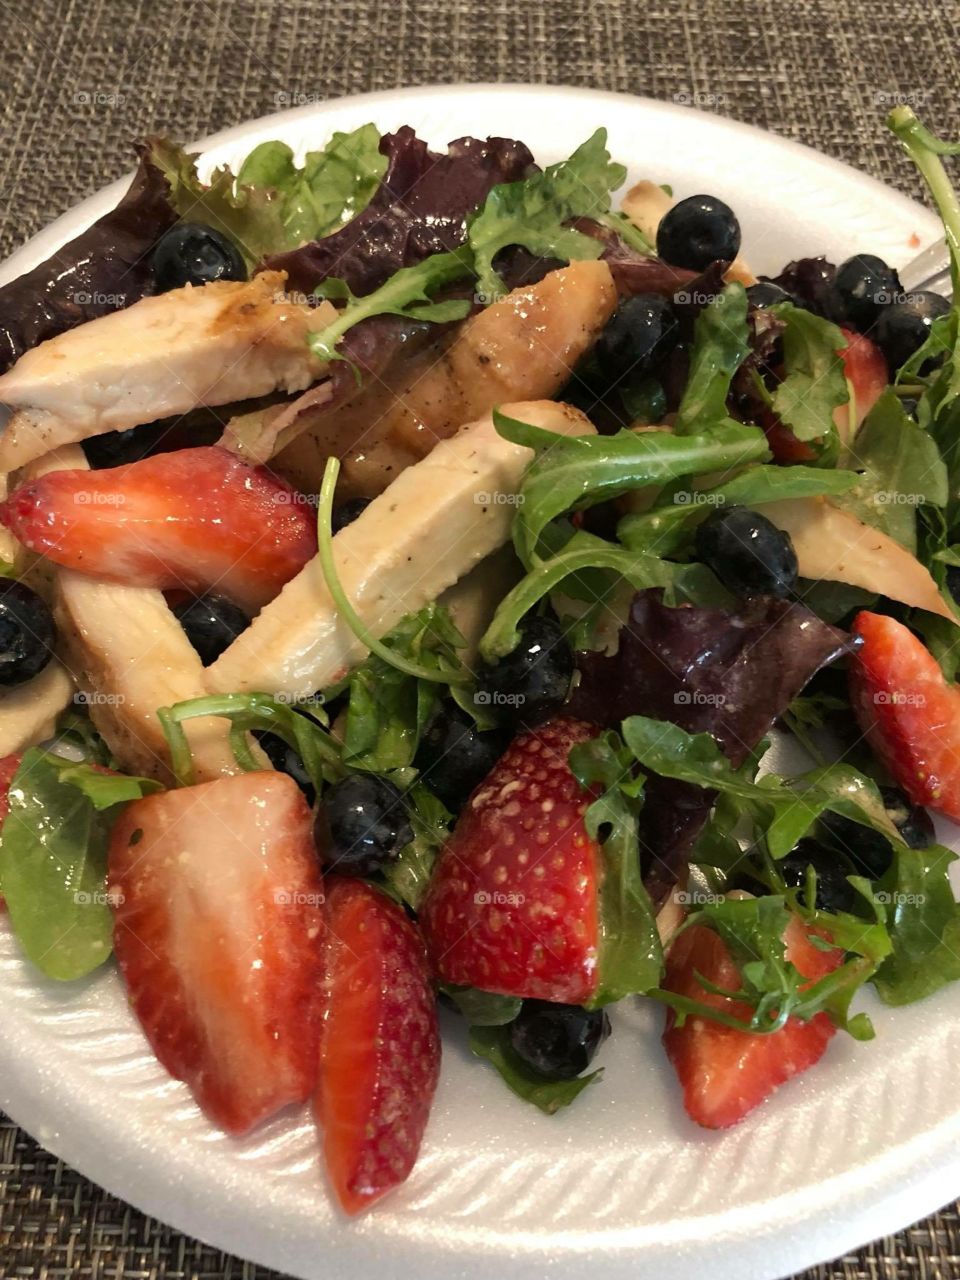 Flavorful Healthy Salad with Grilled Chicken and Berries glazed with honey mustard sauce.